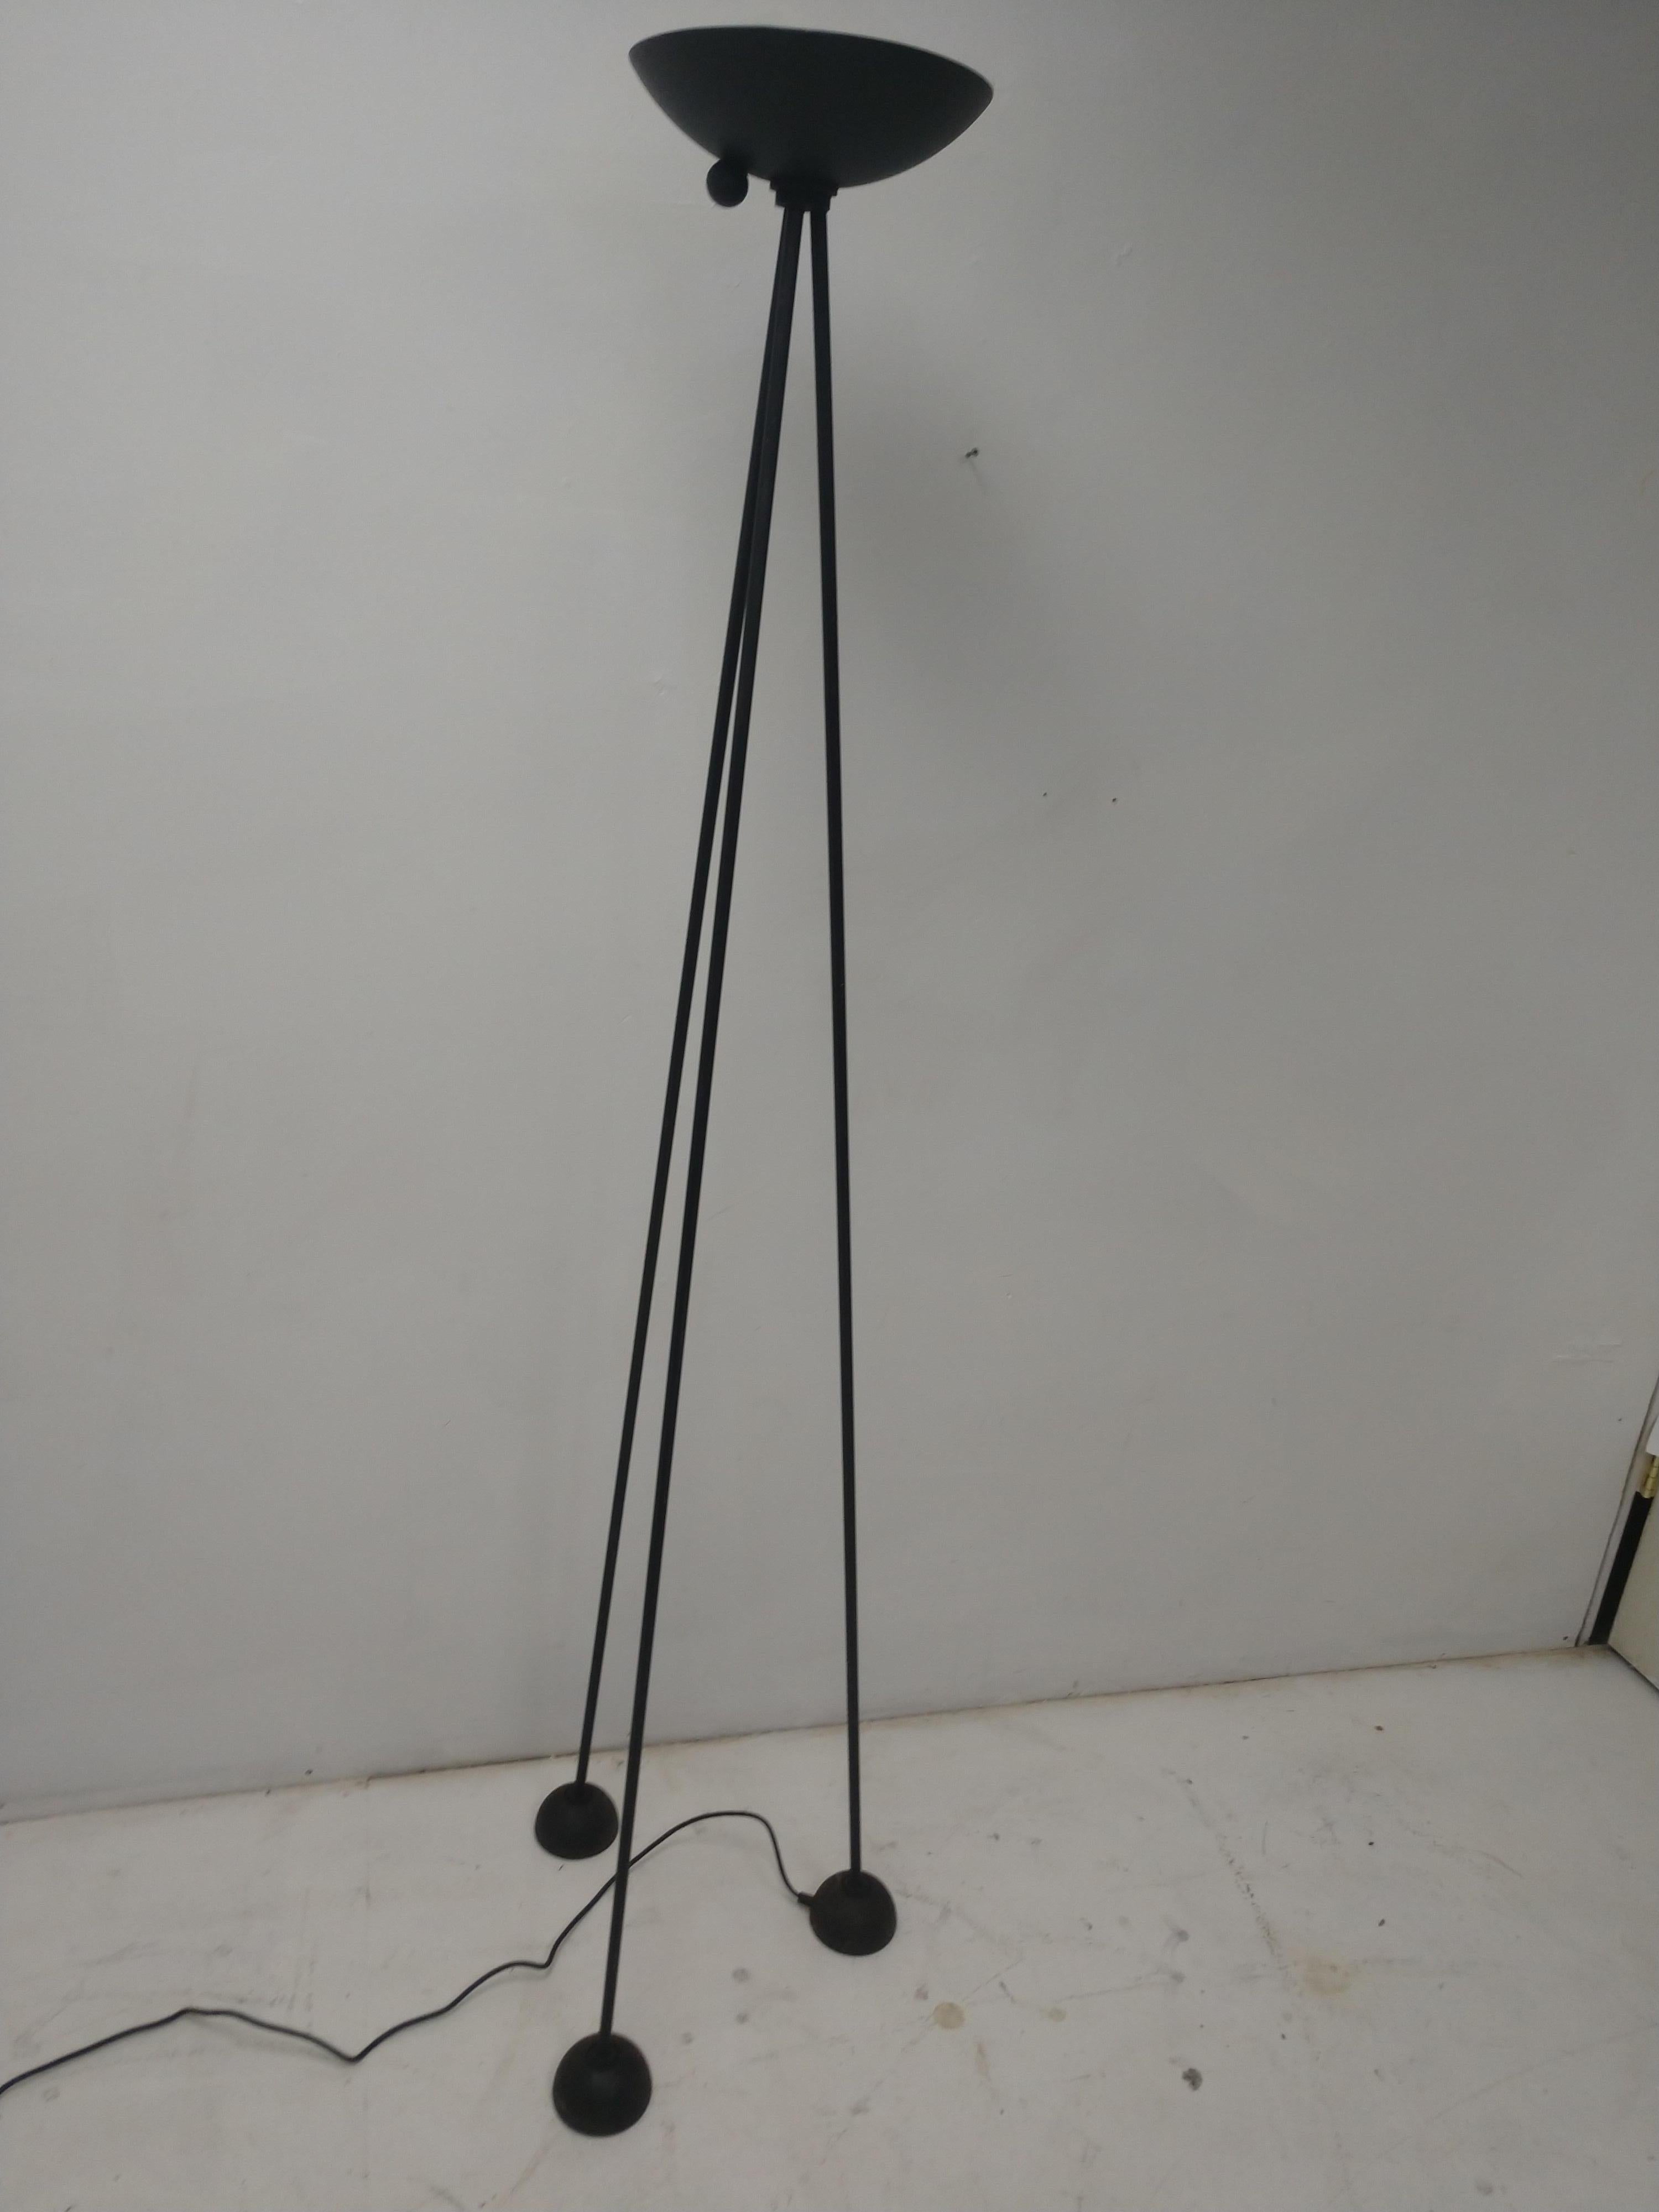 Sleek and sexy Postmodern torchiere floor lamp by Koch & Lowy. Patinated finish on the steel rod legs and cast feet. Halogen bulb which has a dimmer switch. Stands very firm.